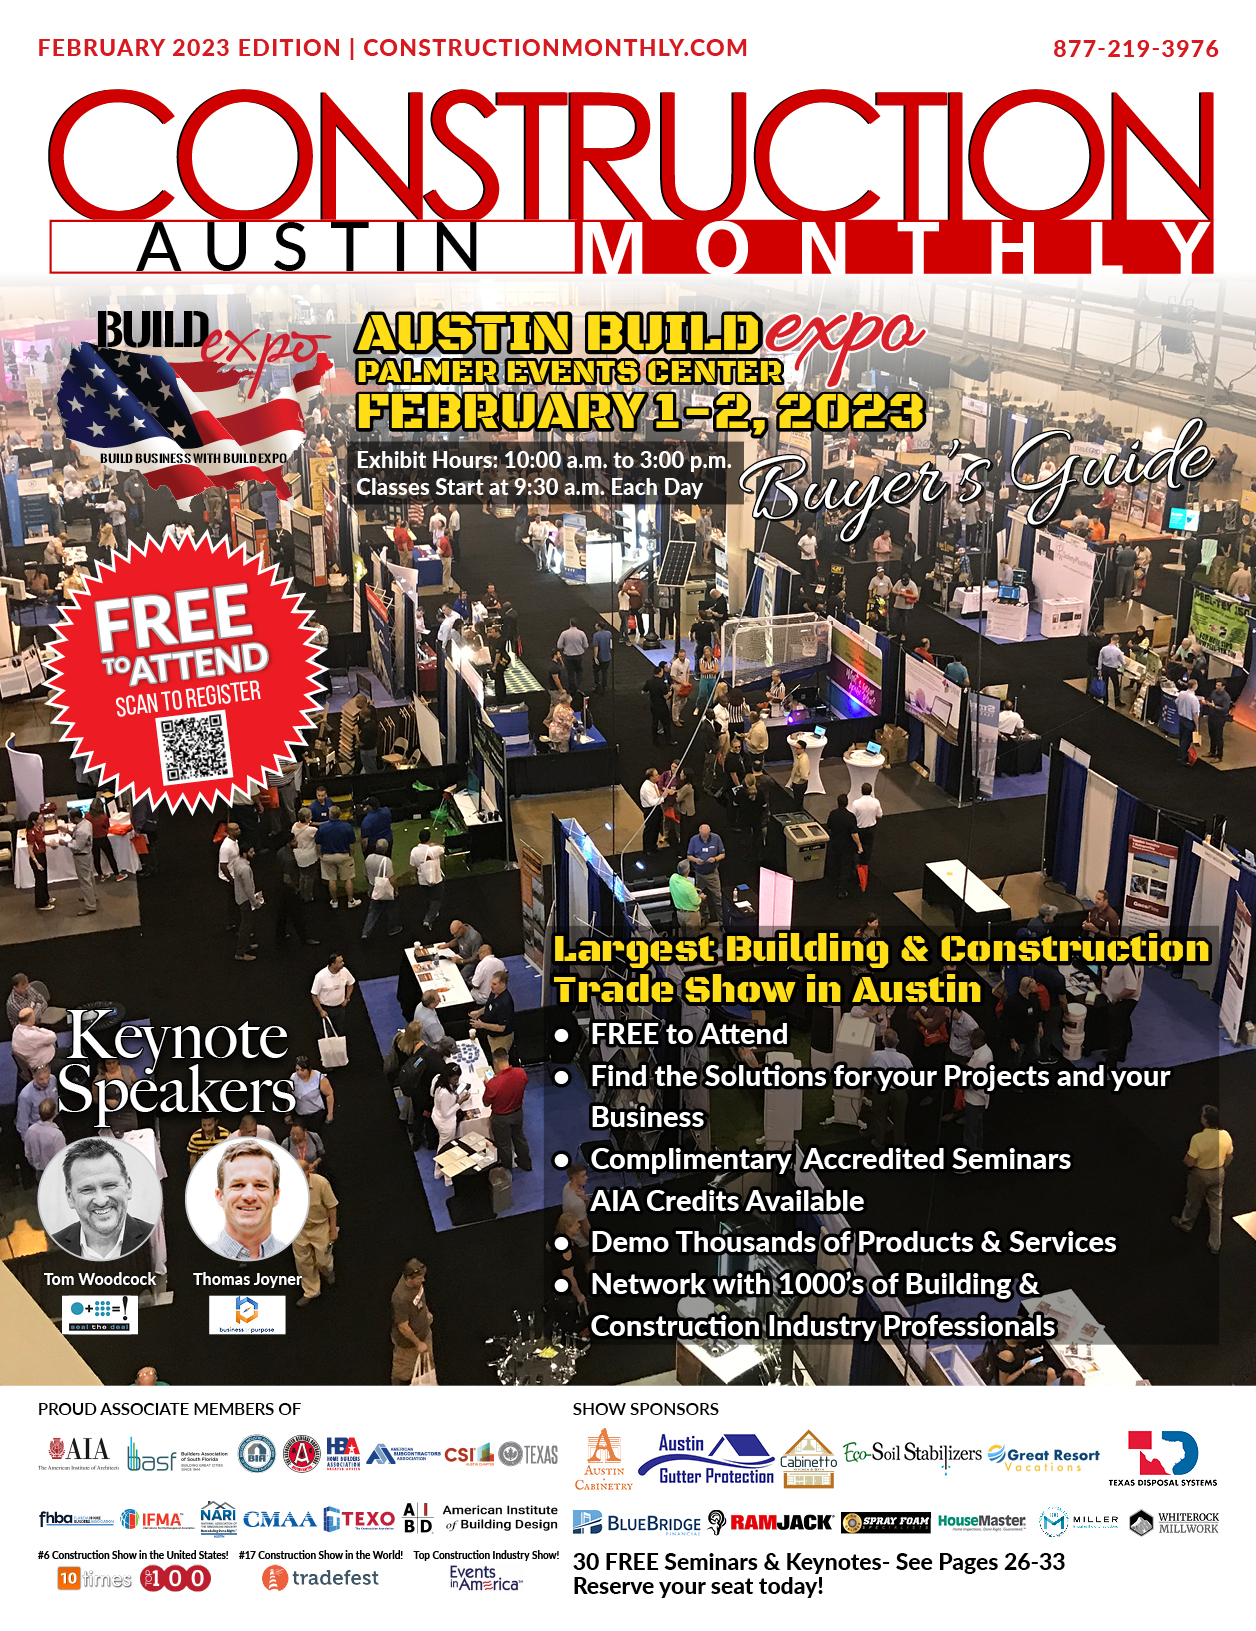 Construction Monthly Austin 2023